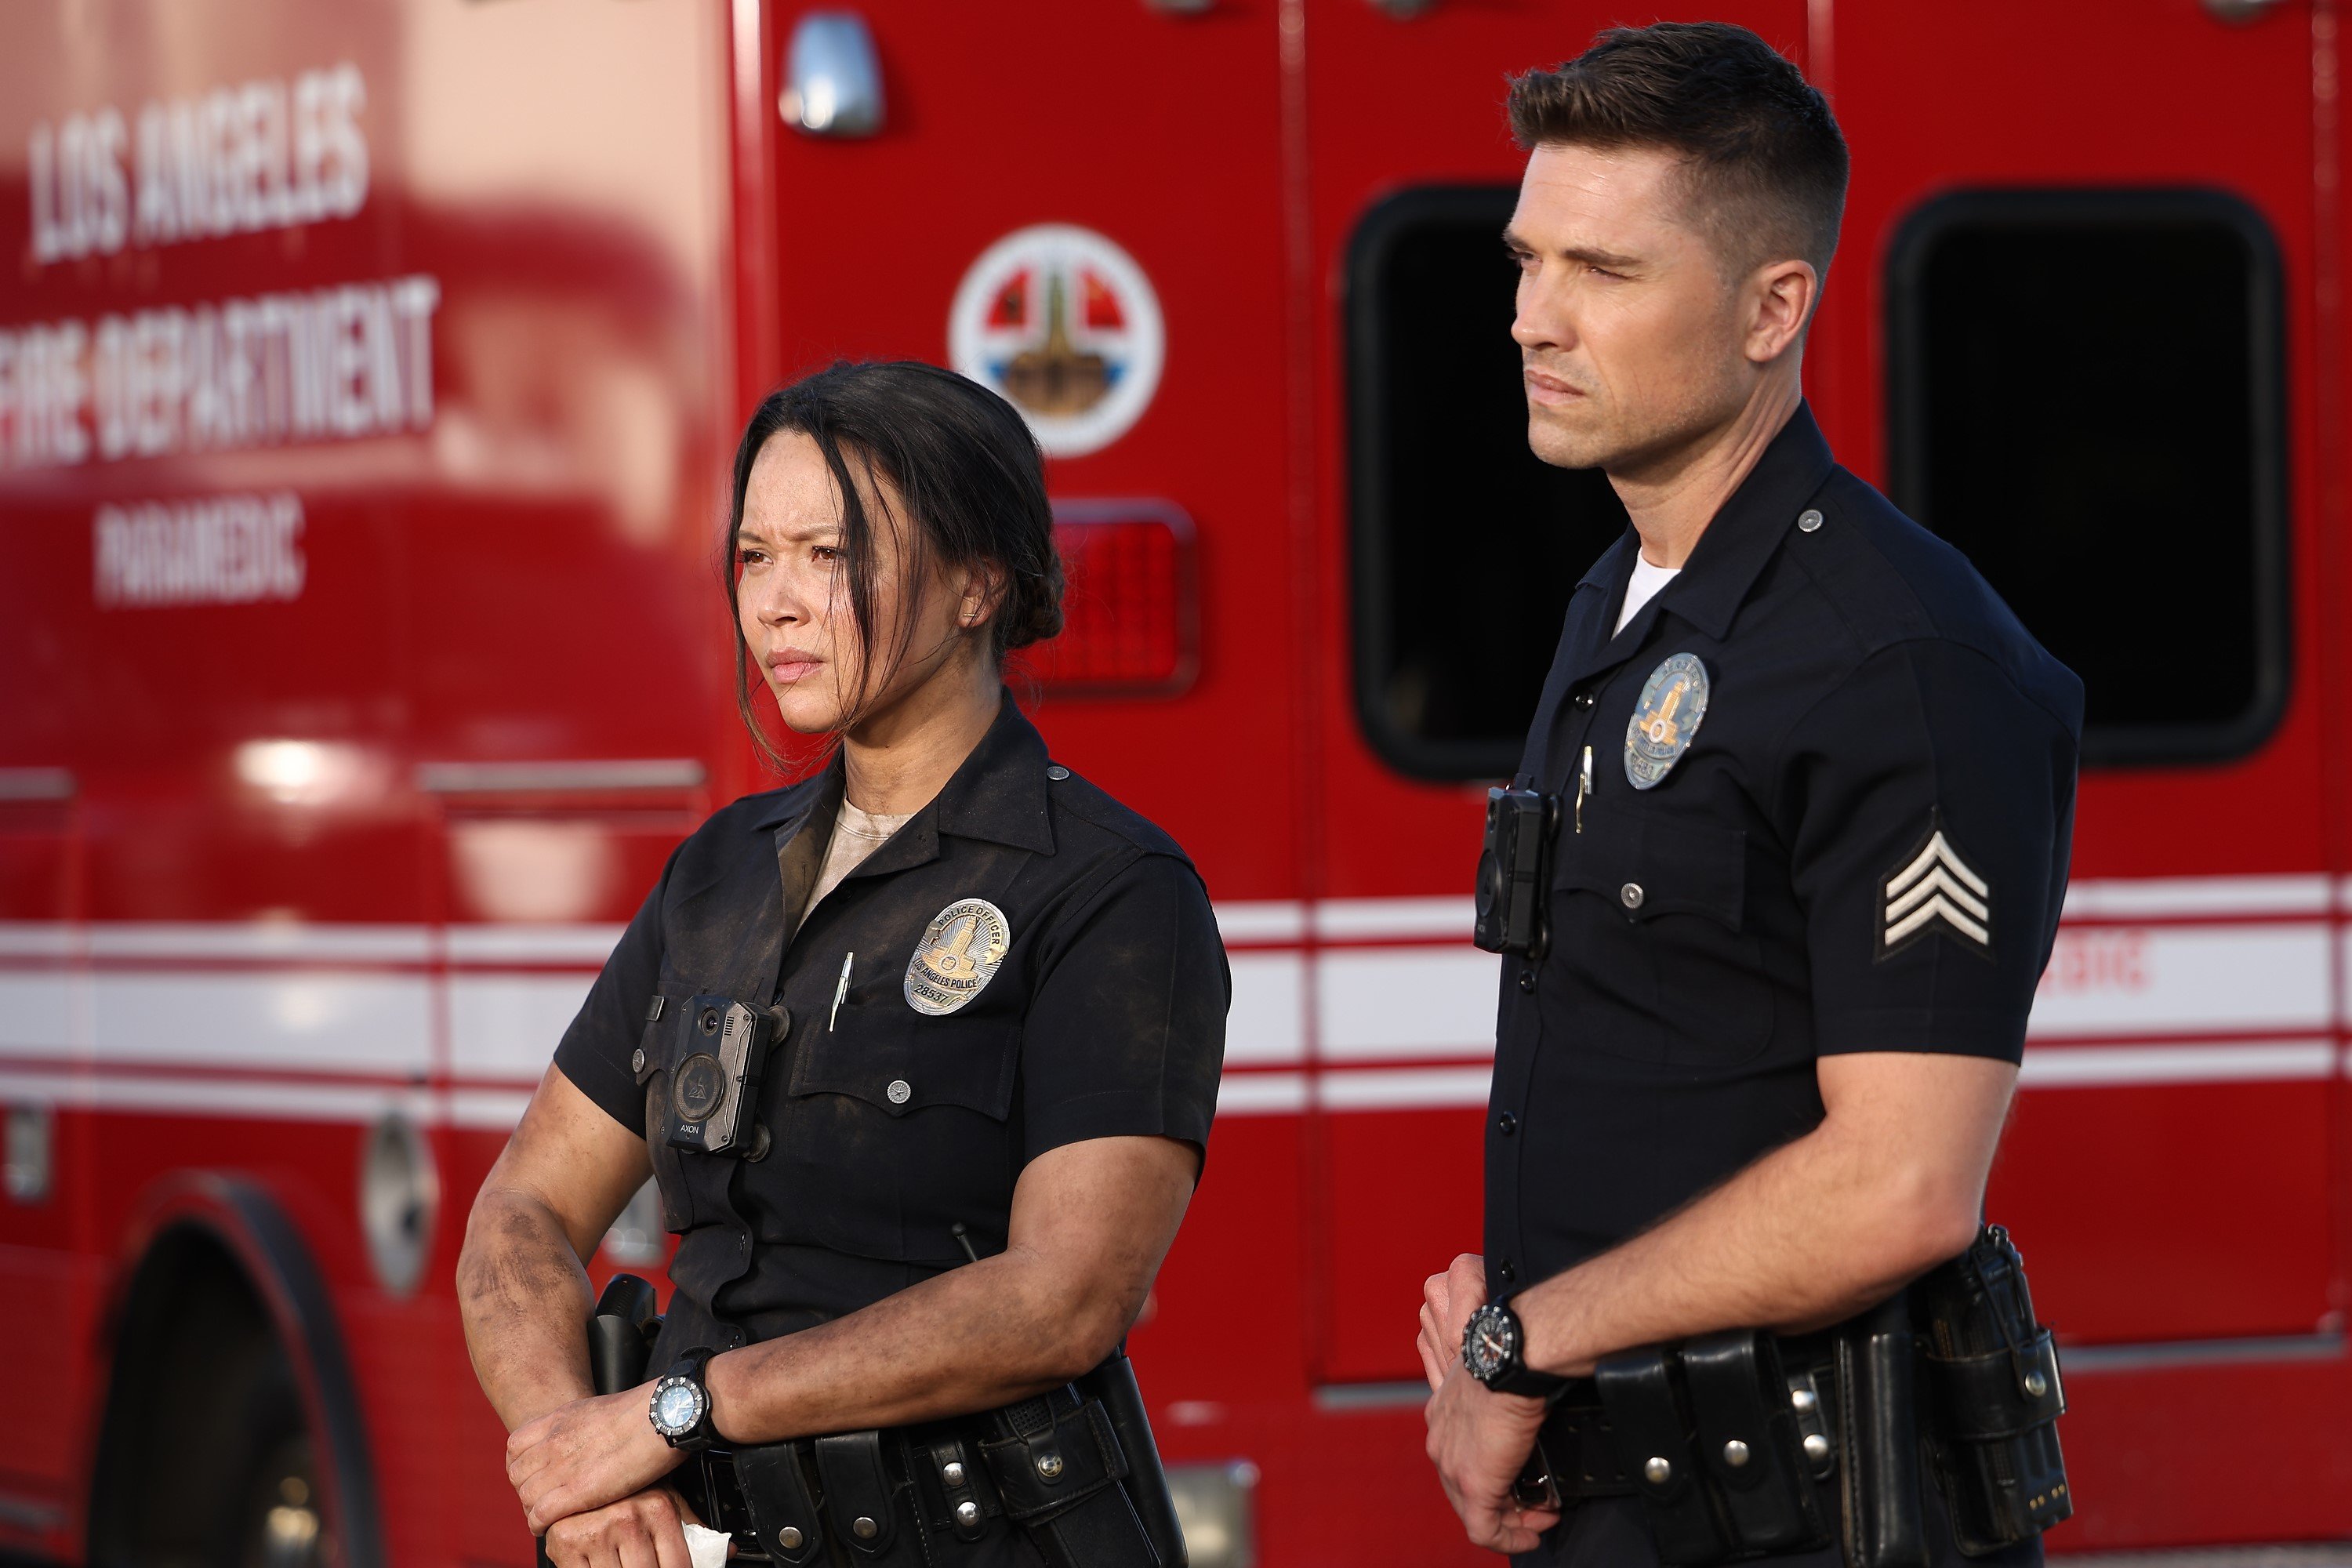 Melissa O'Neil and Eric Winter, in character as Lucy and Tim in 'The Rookie' on ABC, share a scene wearing their dark blue police uniforms.